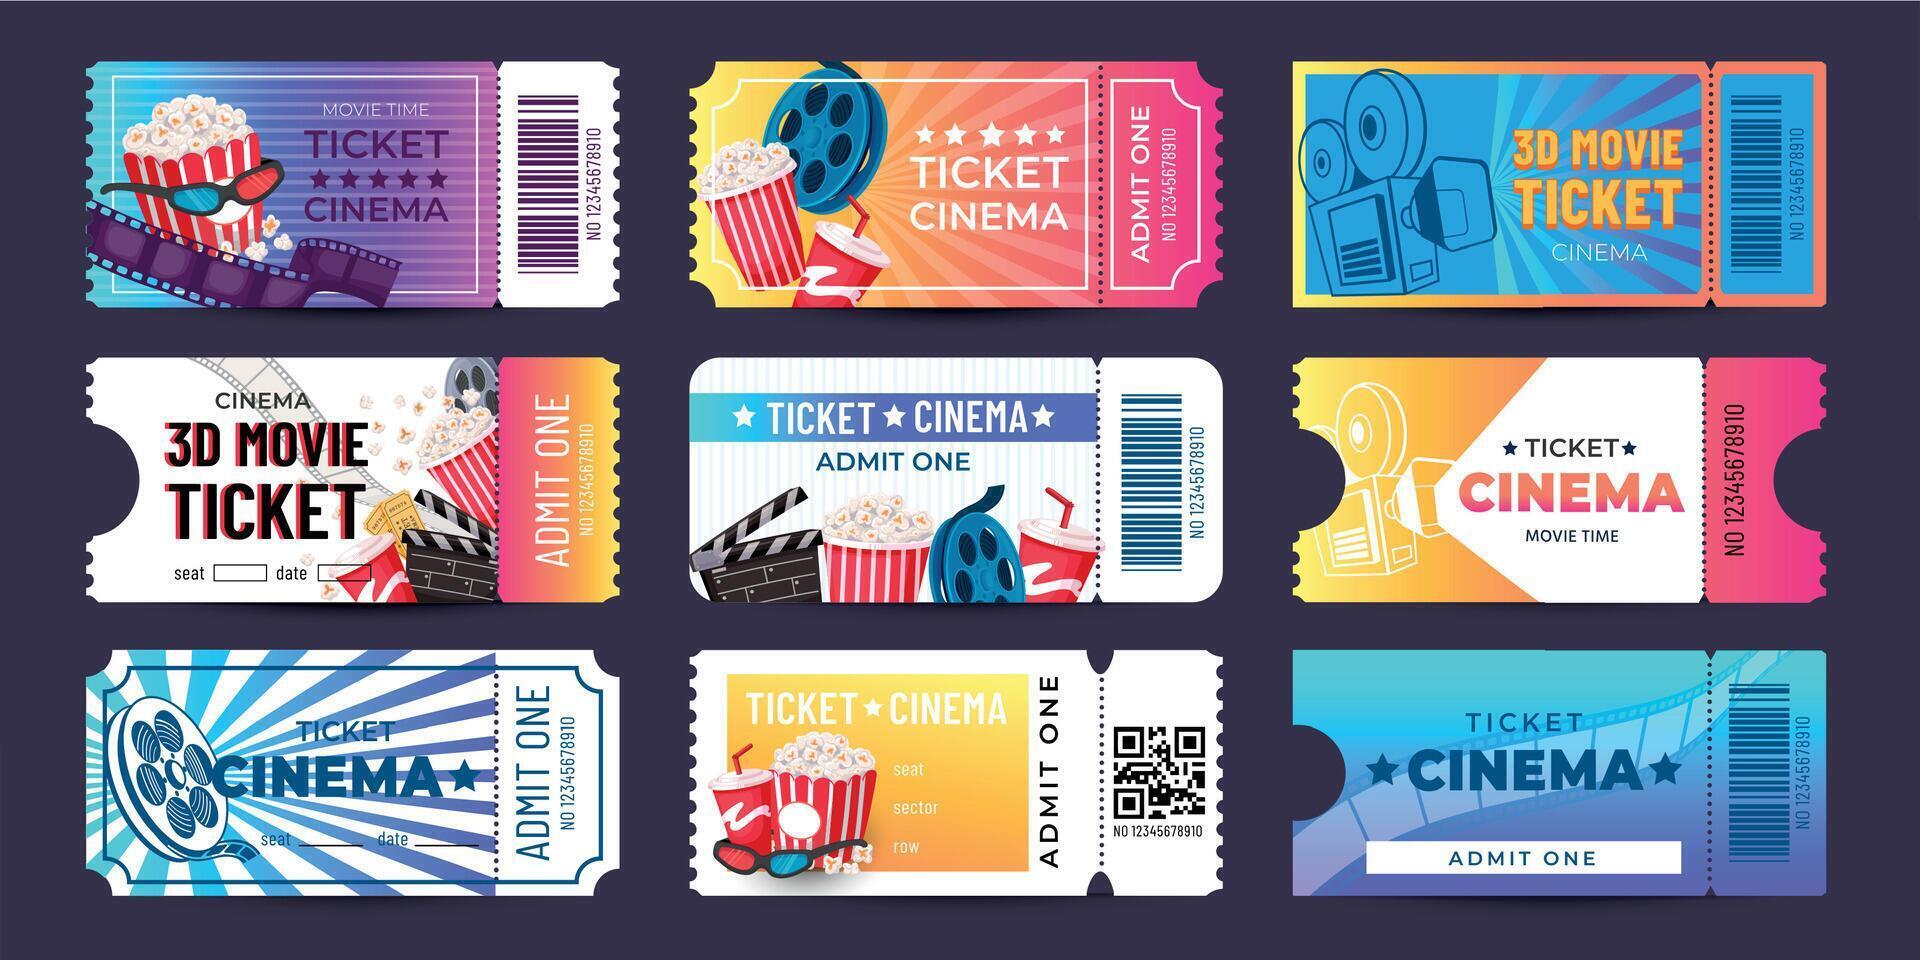 Movie tickets. Cinema event coupon with cartoon icons, retro entry admission ticket mockup design. Vector film festival invite banner collection